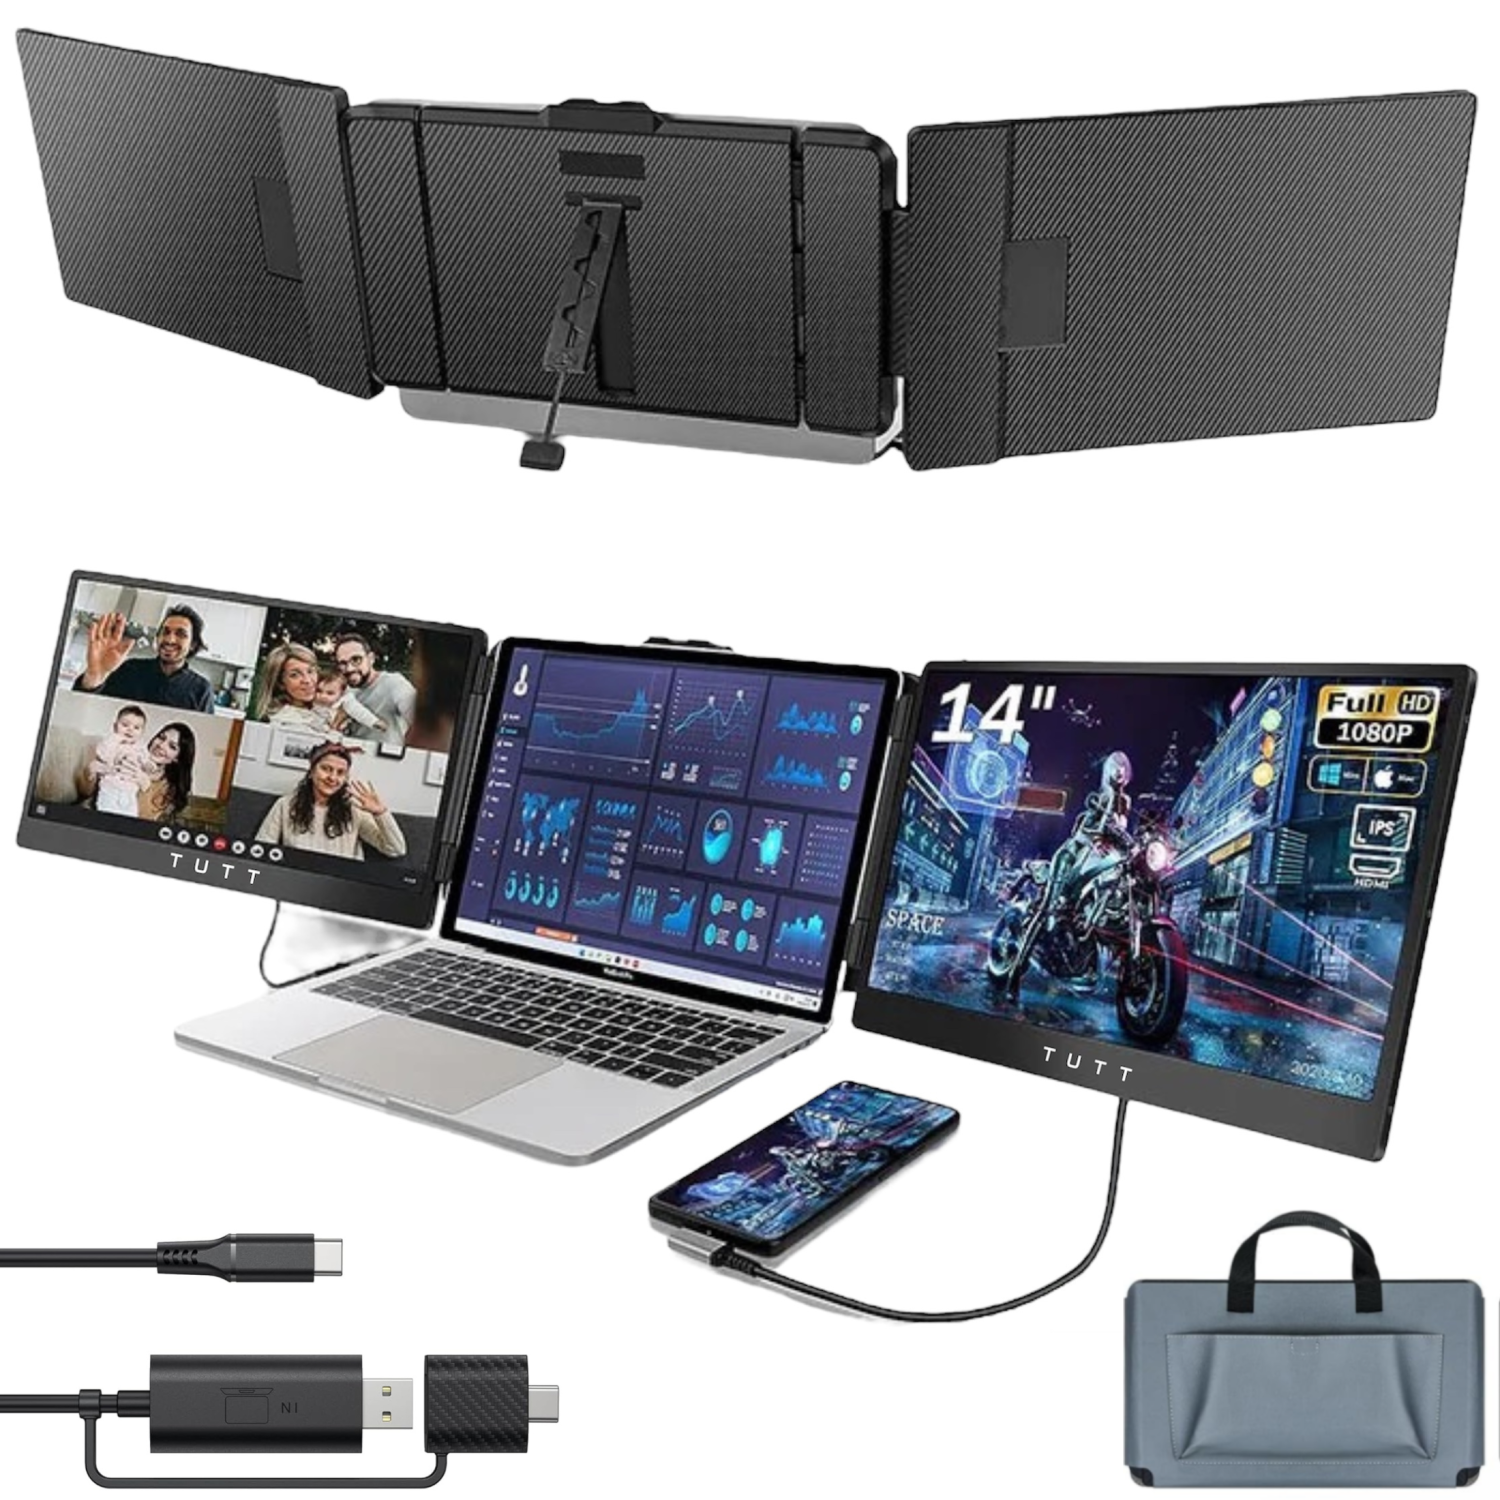 TUTT S2 FHD 14” Portable Laptop Monitor Screen Triple Extender 1080P IPS Built-in Stand and Speakers, HDMI/Type-C Plug and Play Display for 13"-17" Laptops Mac Window Android Linux